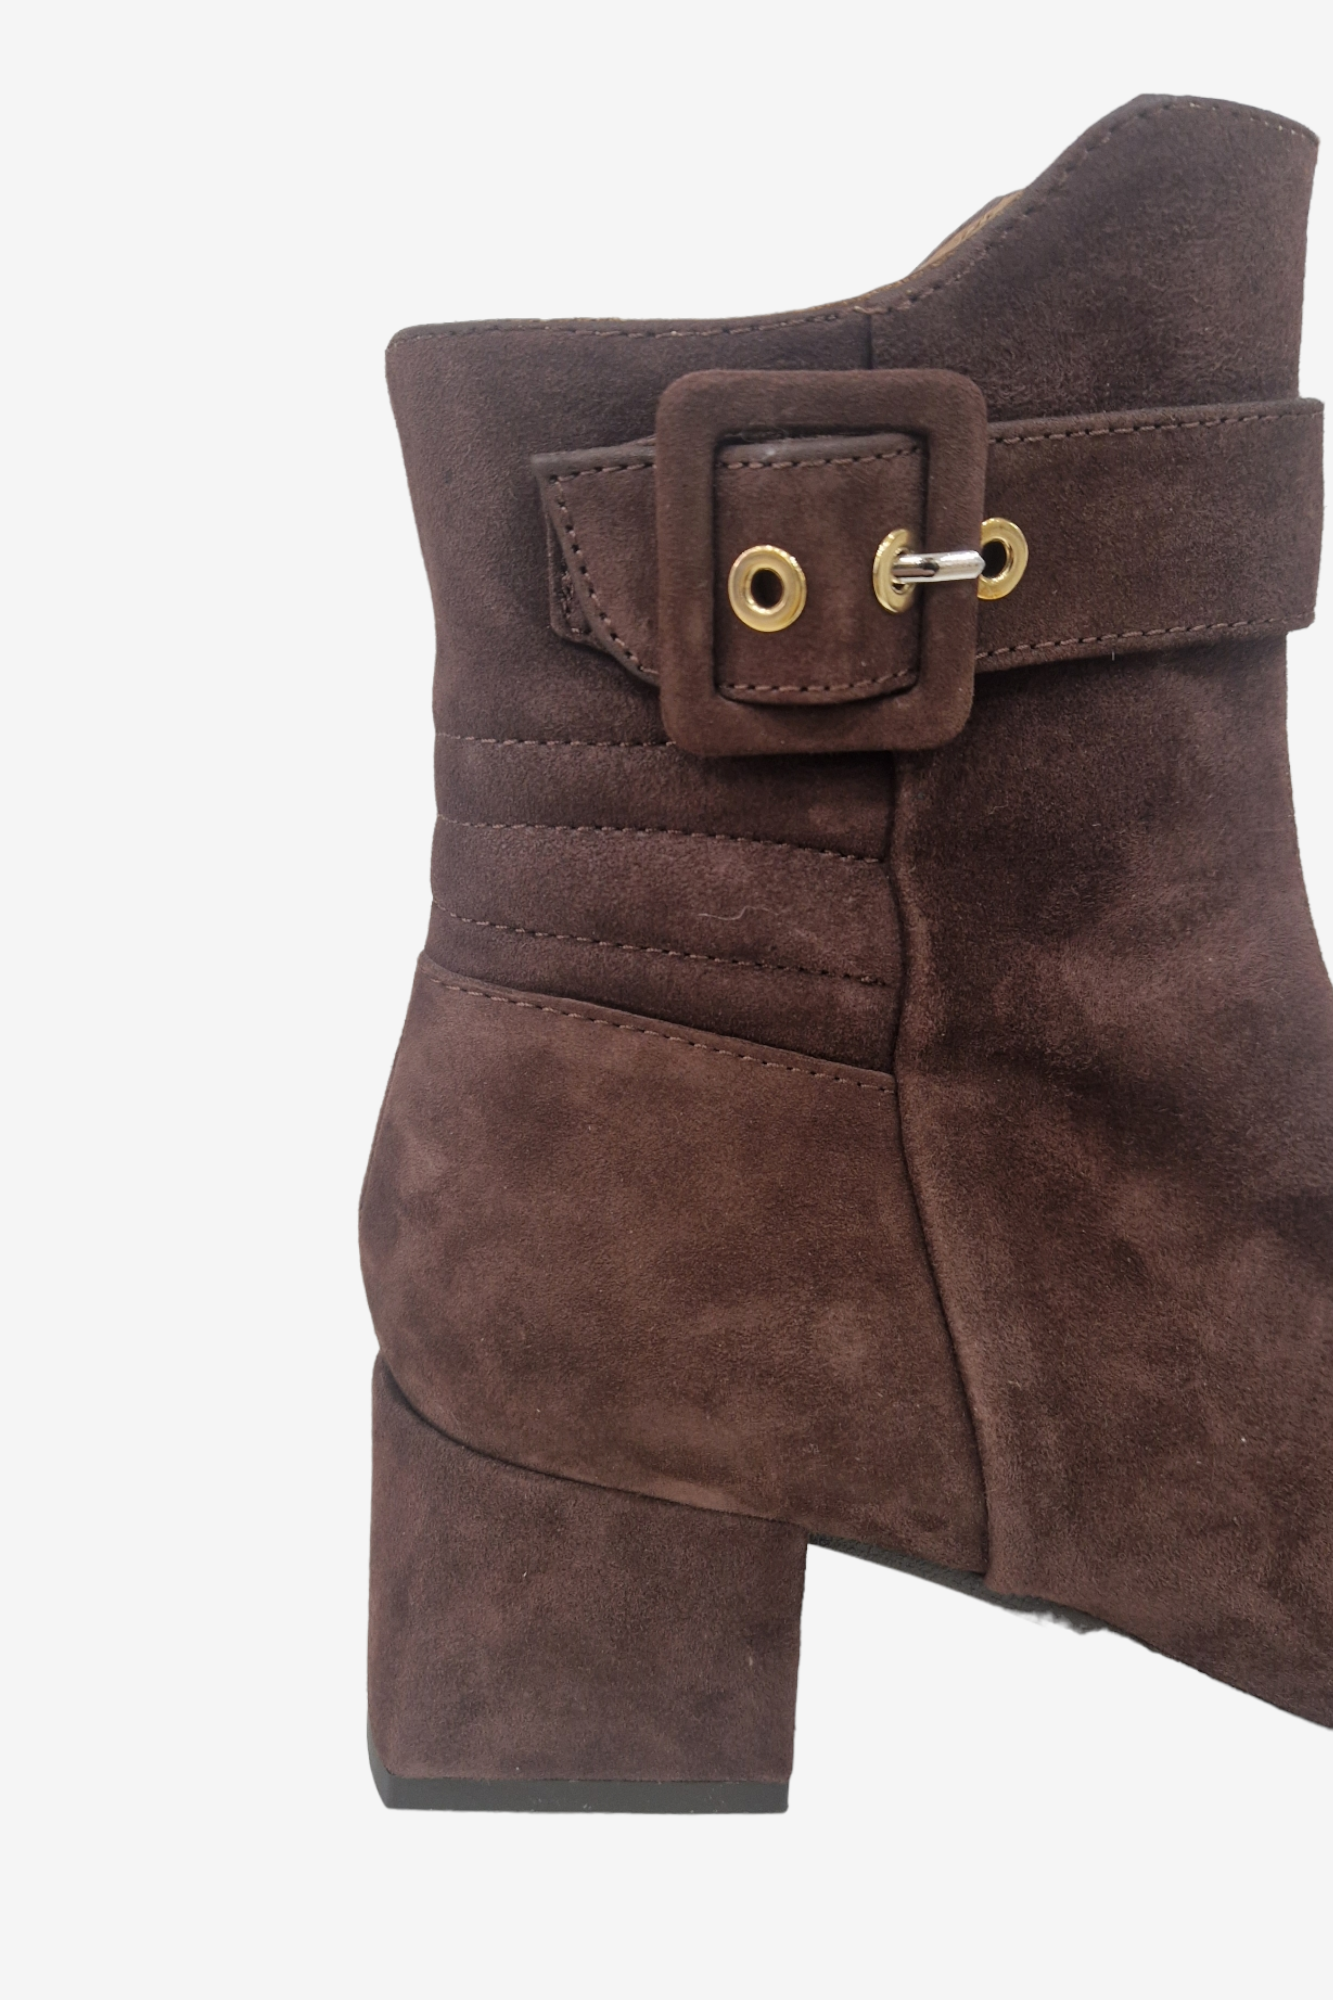 MARIAN 28601 BROWN SUEDE BOOTS